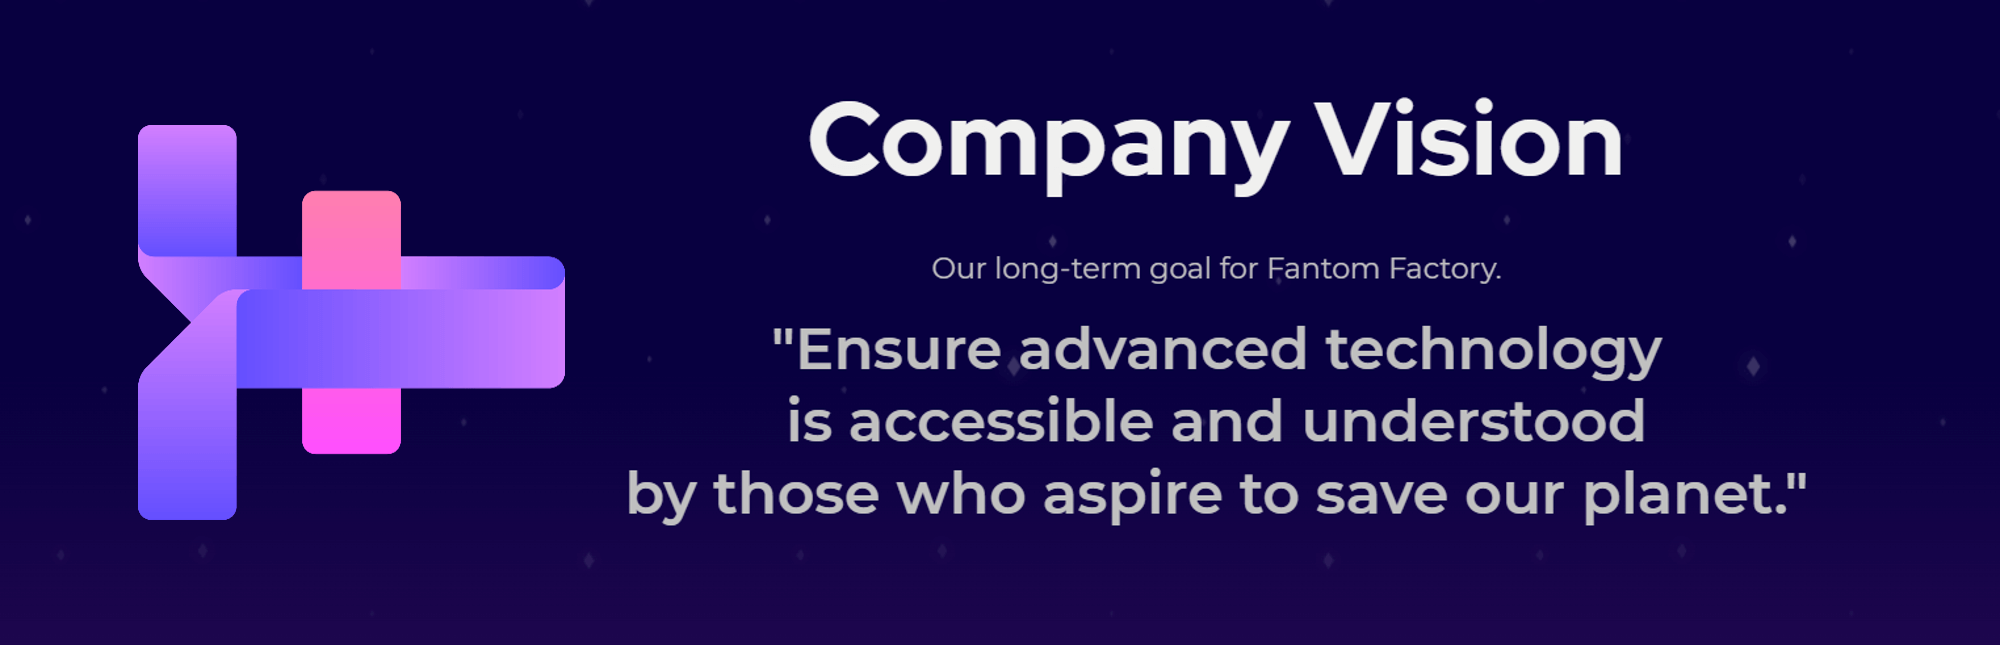 Company Vision: Ensure advanced technology is accessible and understood by those who aspire to save our planet